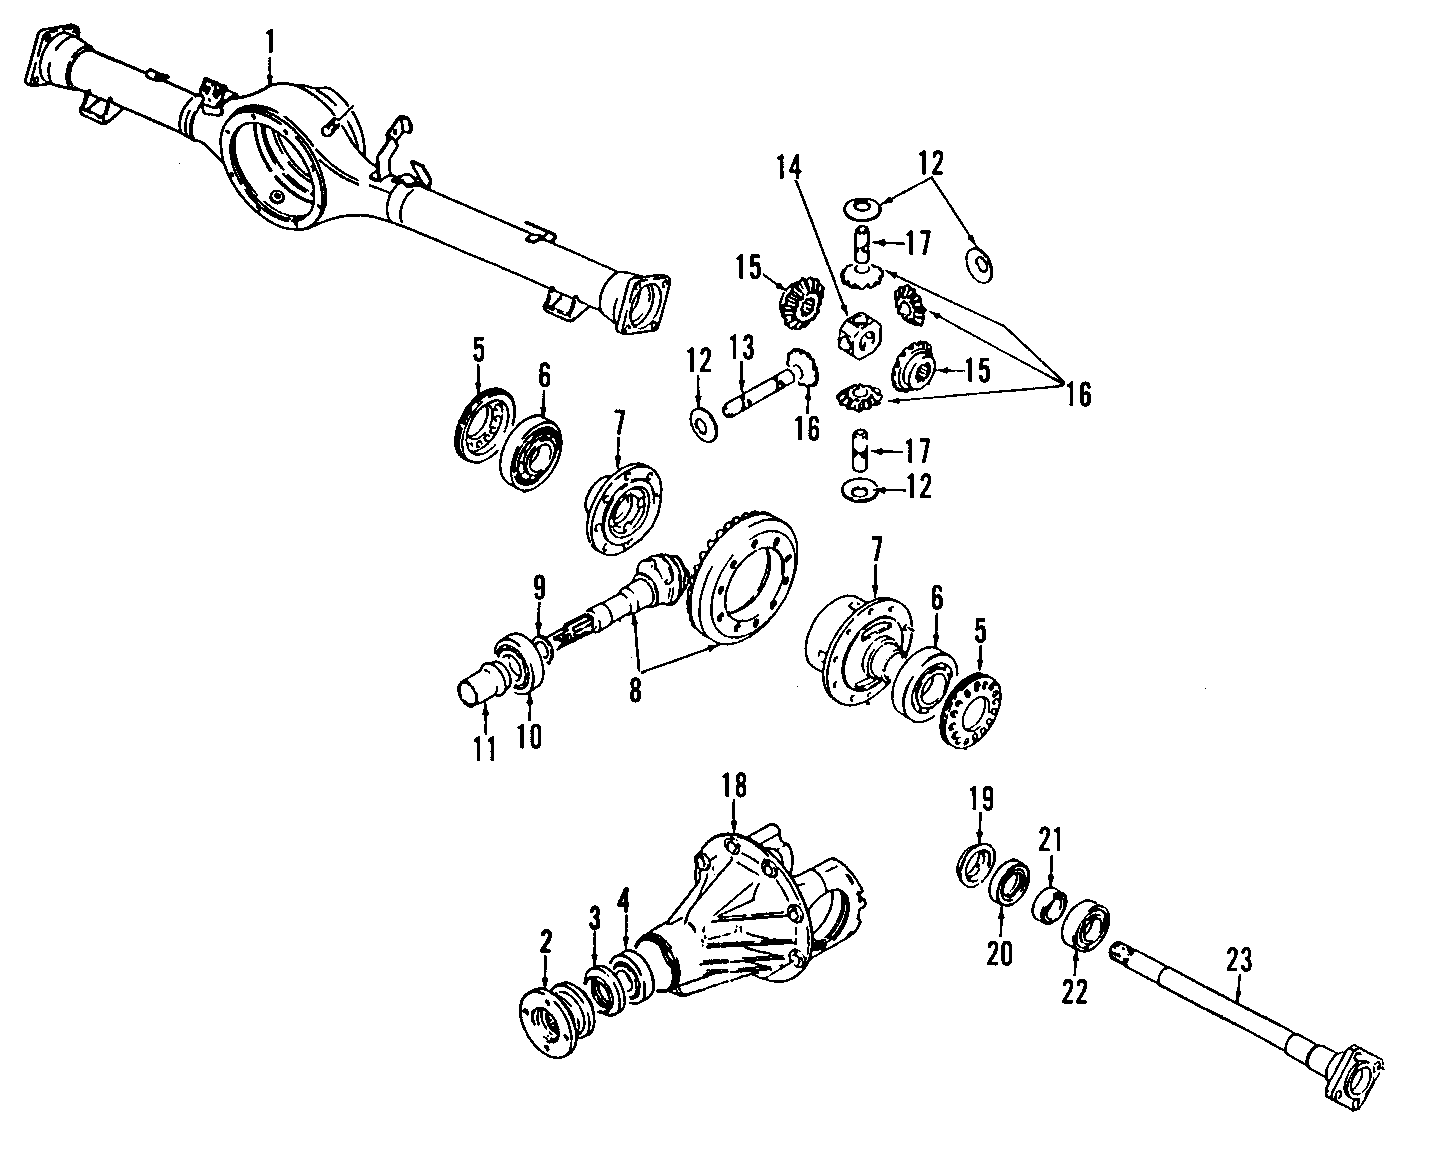 5REAR AXLE. DIFFERENTIAL. PROPELLER SHAFT.https://images.simplepart.com/images/parts/motor/fullsize/T011110.png